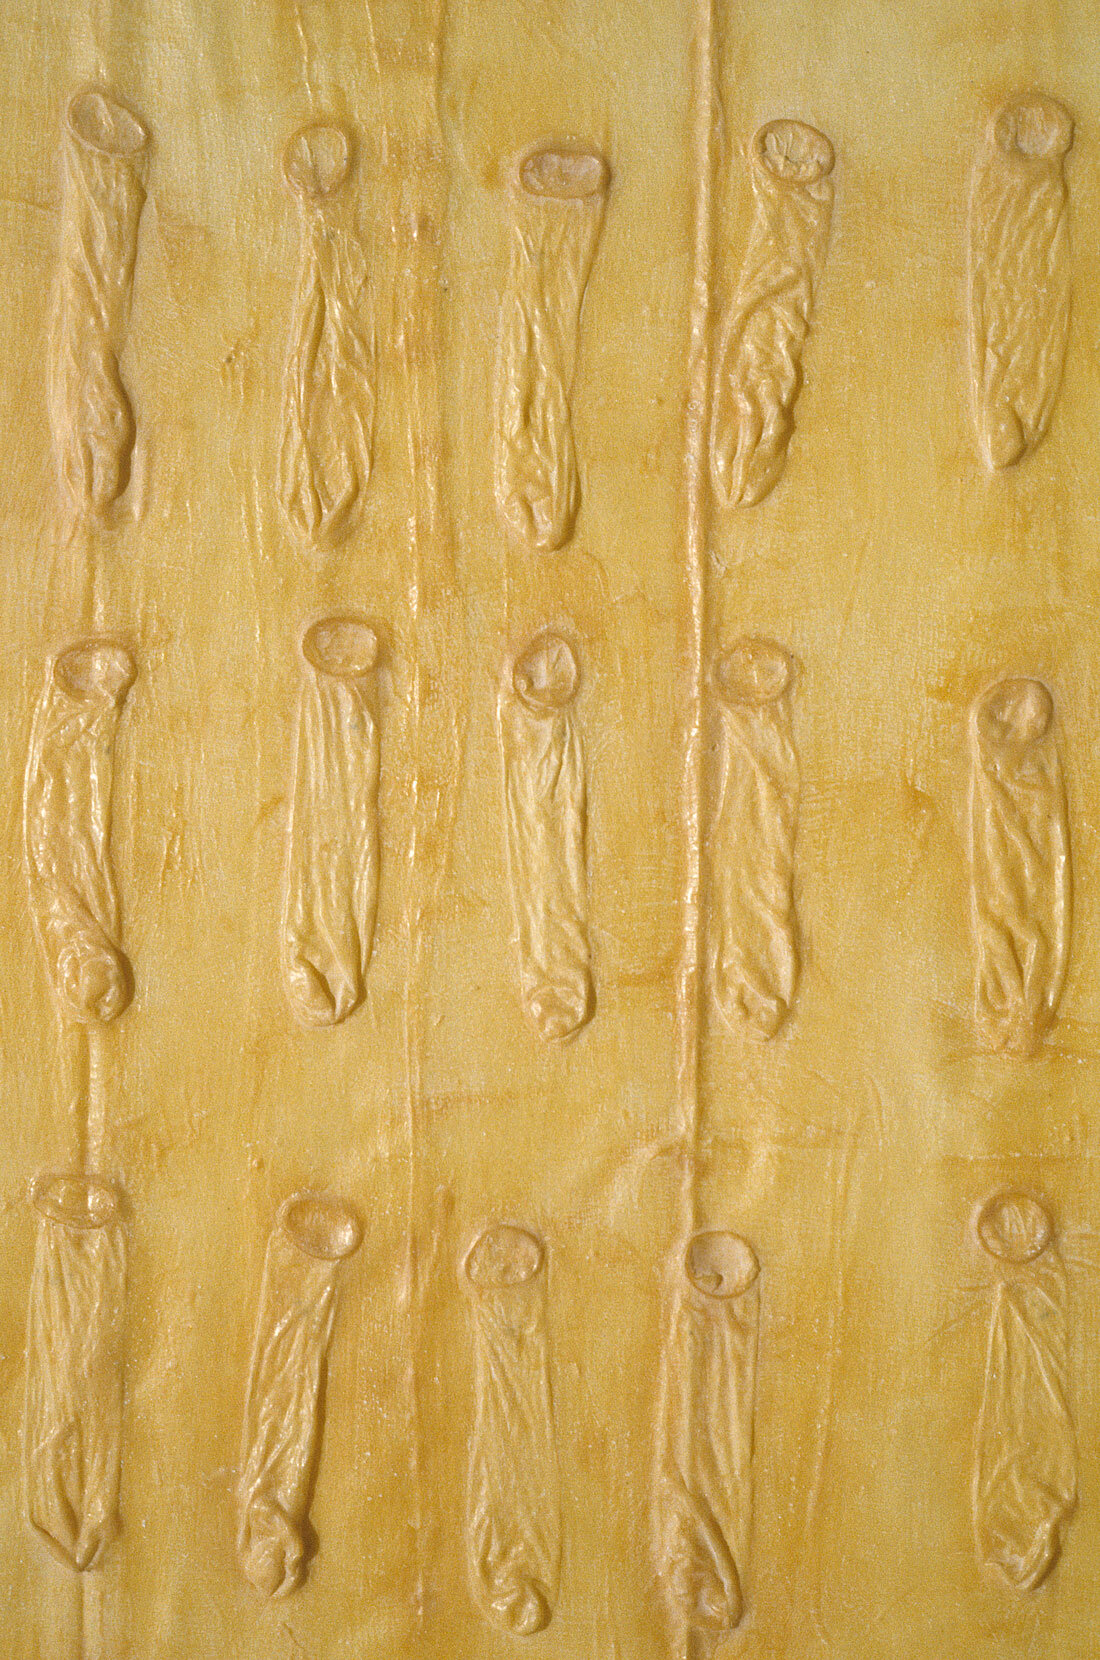   Condom Relief Piece No. 1  (detail), 1971, rubber latex, condoms, cheesecloth, 82 x 64 inches 